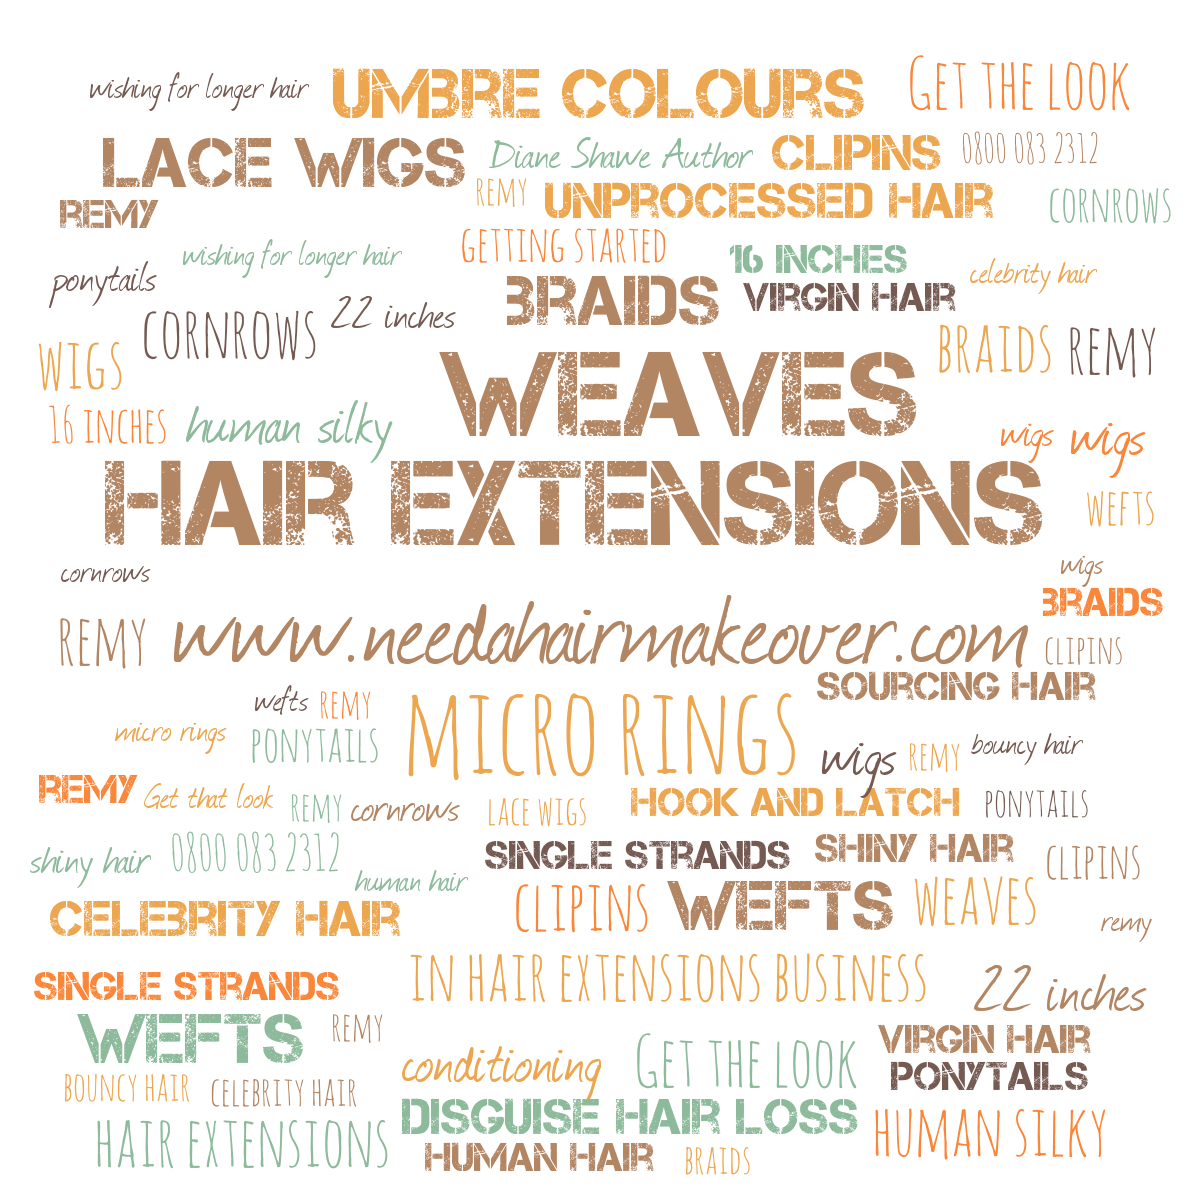 Does and Don’t Prior to Getting Your Wedding Hair Extensions Done